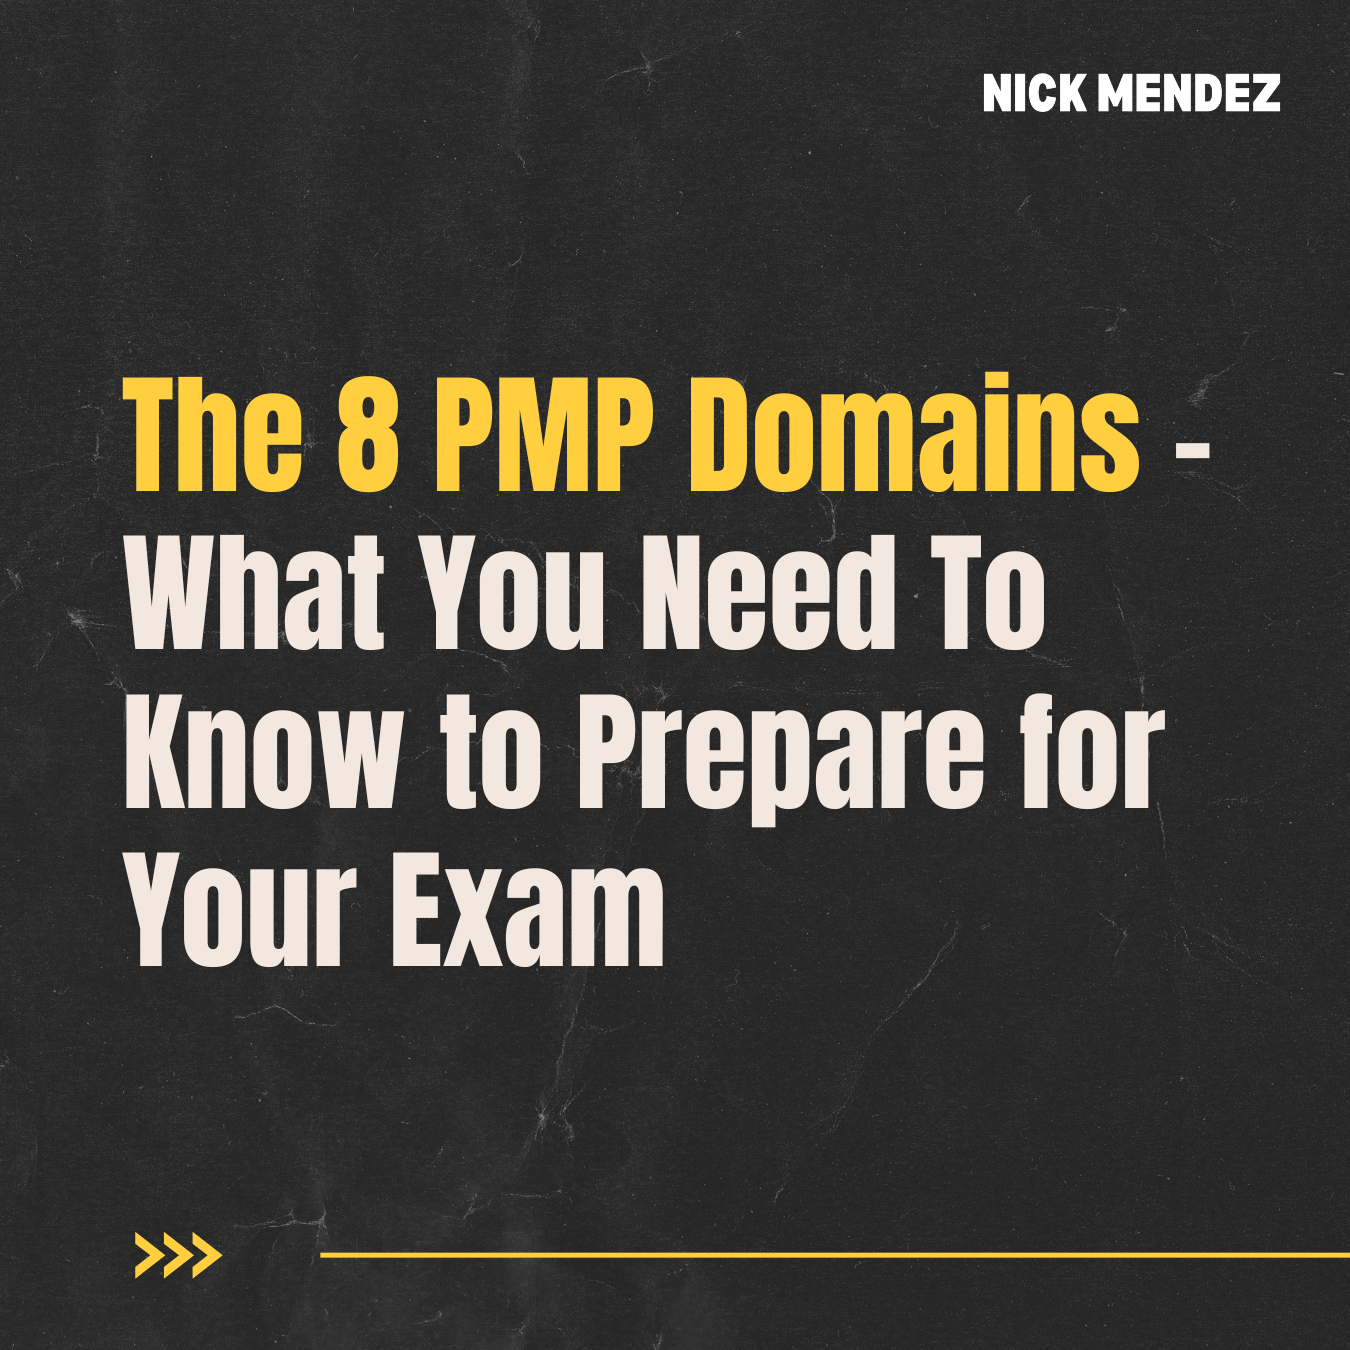 The 8 New PMP Domains - What You Need To Know to Prepare for Your Exam by Nick Mendez, Nicholas Mendez